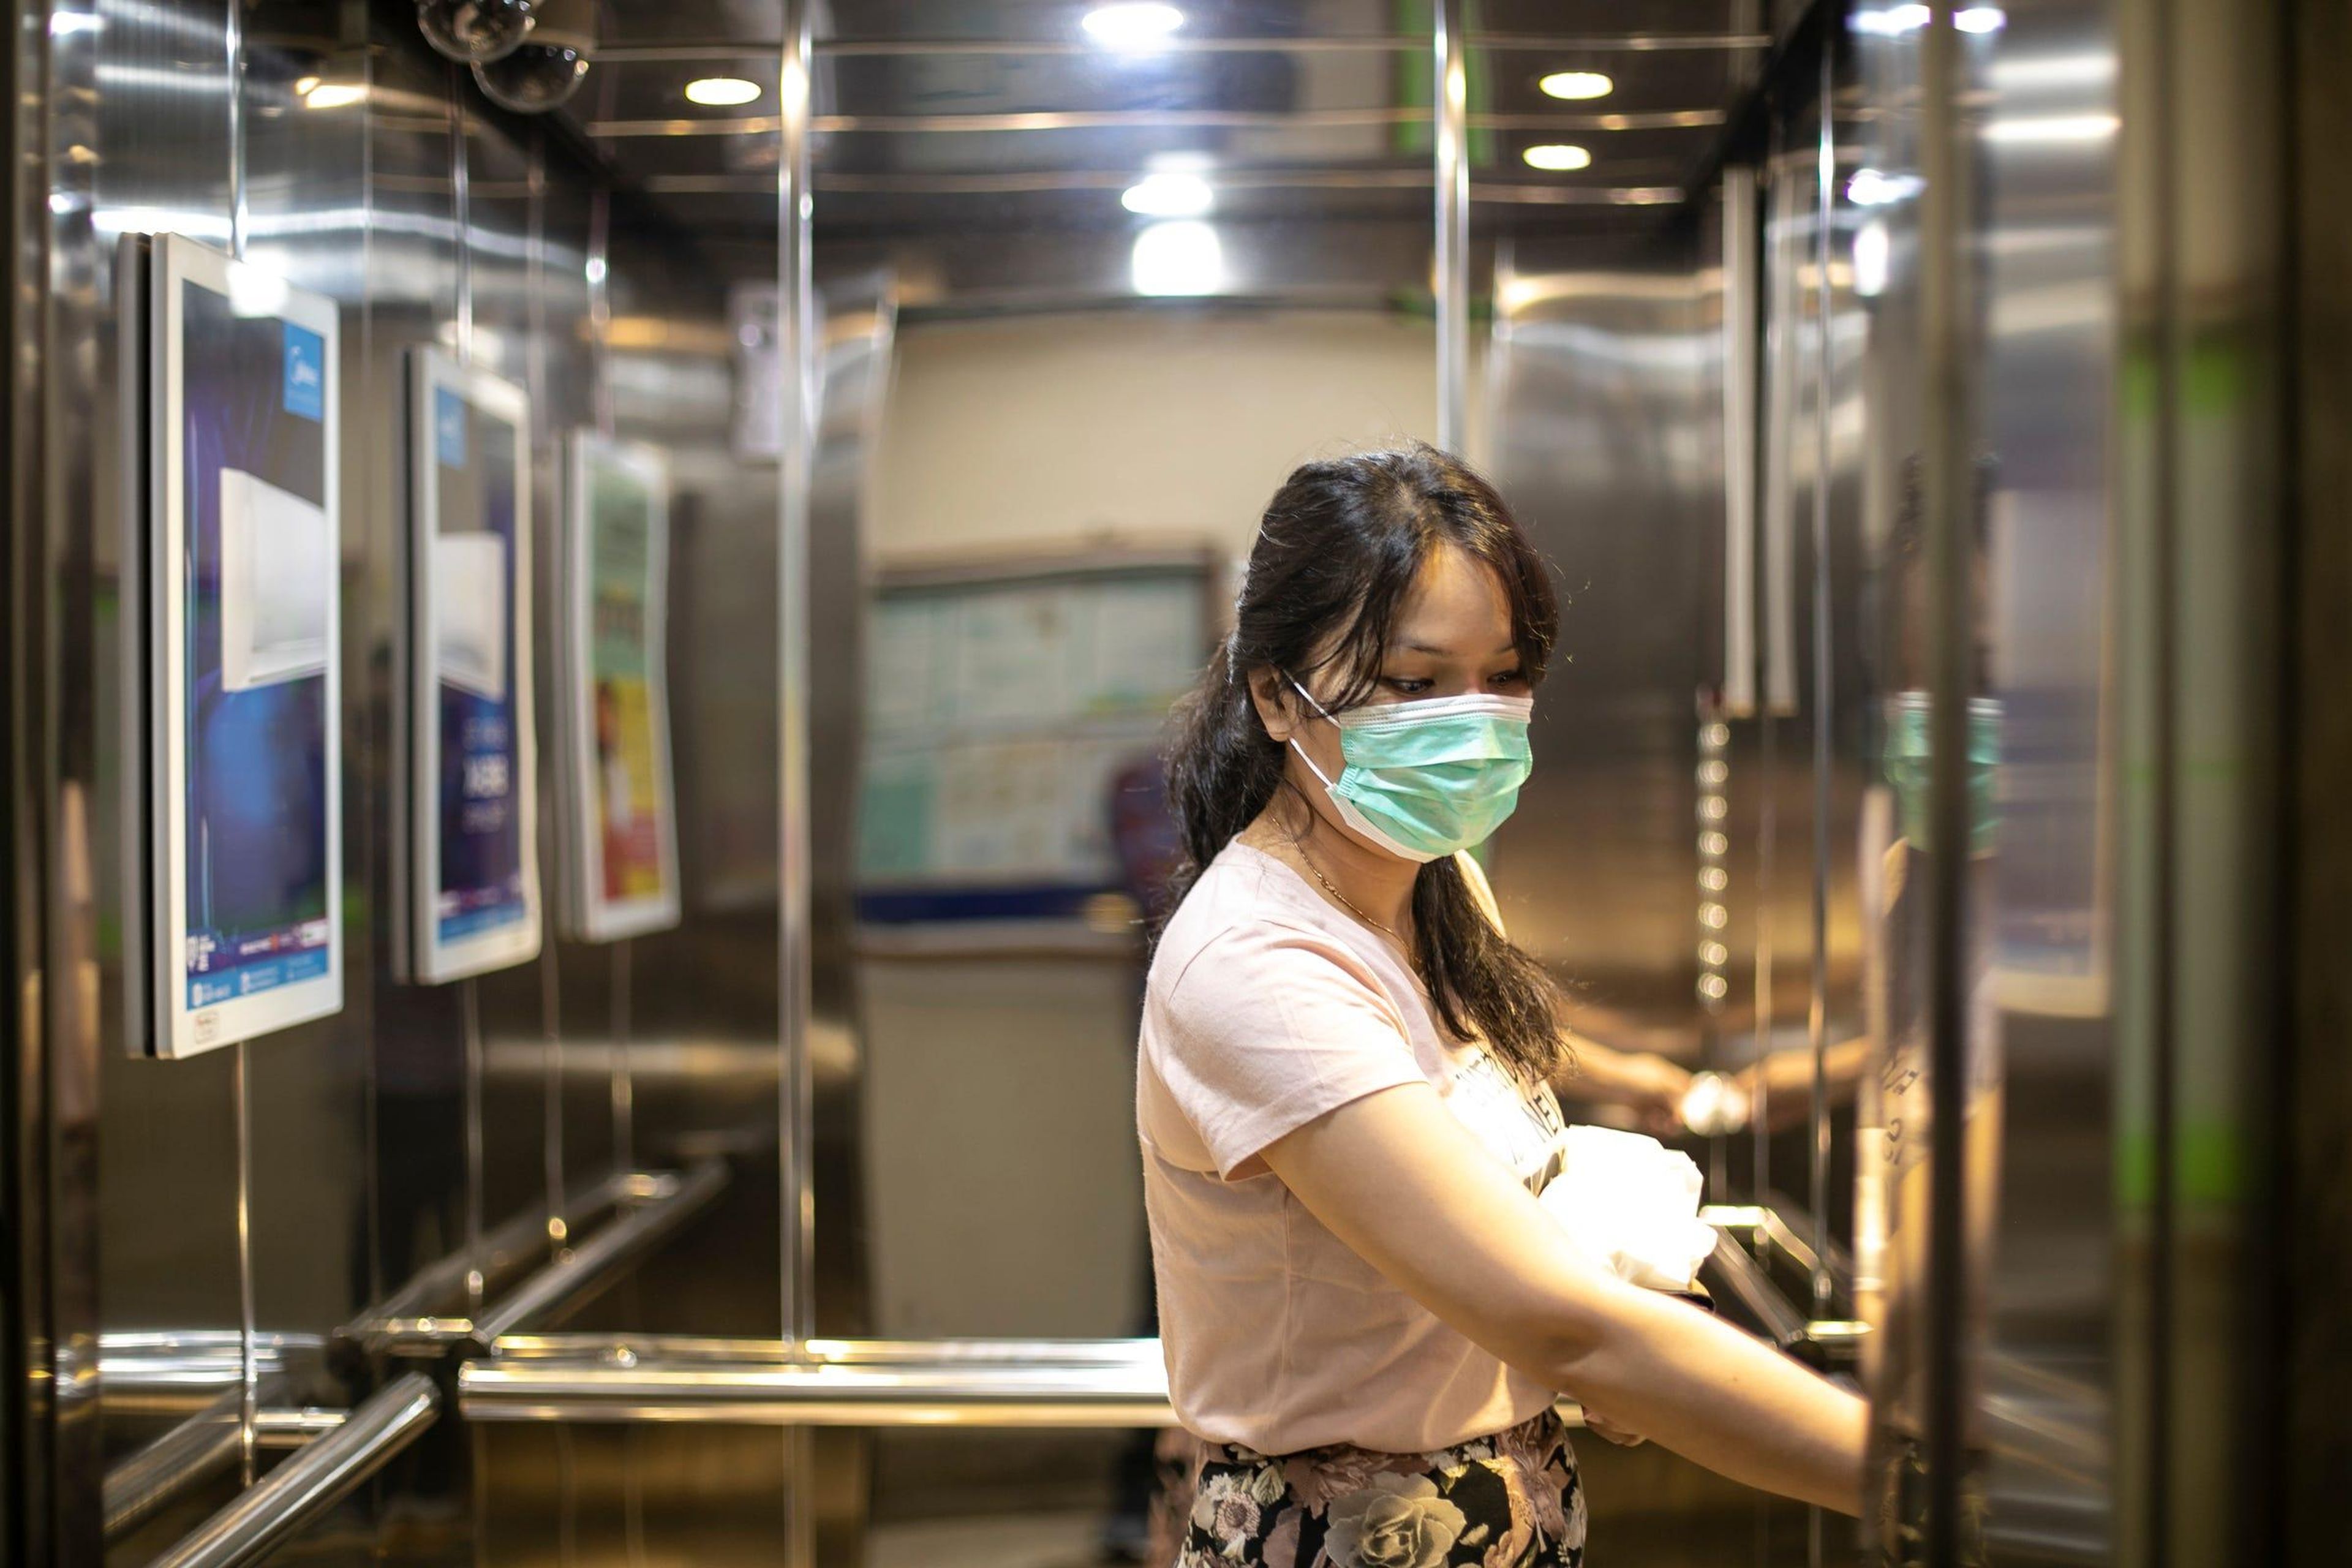 A young woman in an elevator wears a face mask to prevent coronavirus spread. Getty Images